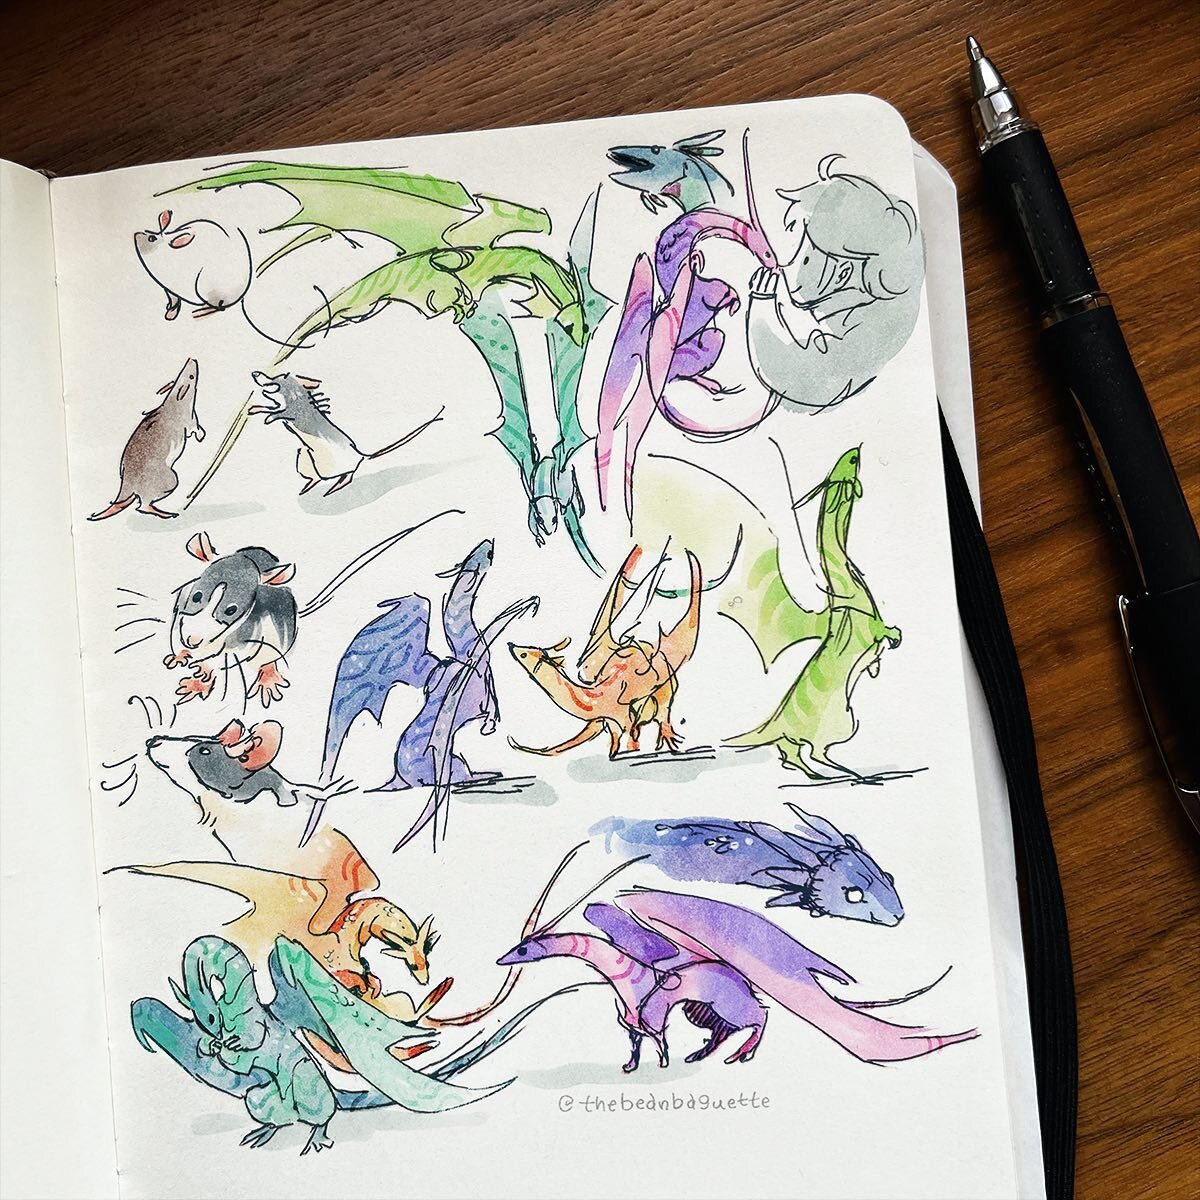 A bunch of cheerful sketchbook dragonlings&hellip;
If you&rsquo;ve followed me long enough you&rsquo;ll remember similar little friends from the past. My approach to drawing rats is the same as dragons, or maybe it&rsquo;s the other way around&mdash;